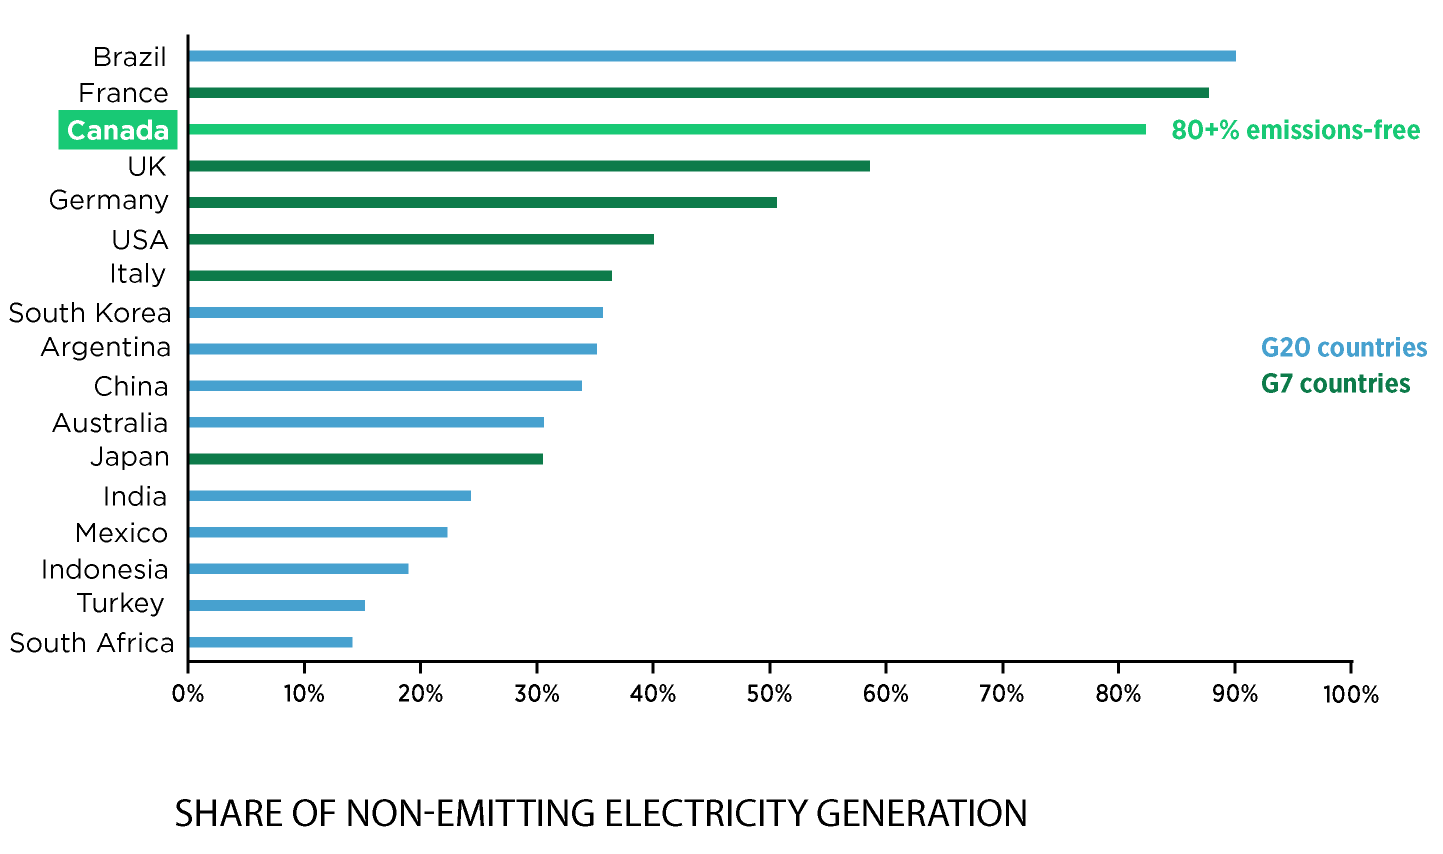 Bar chart showing the share of non-emitting electricity generation in each G7 and G20 country